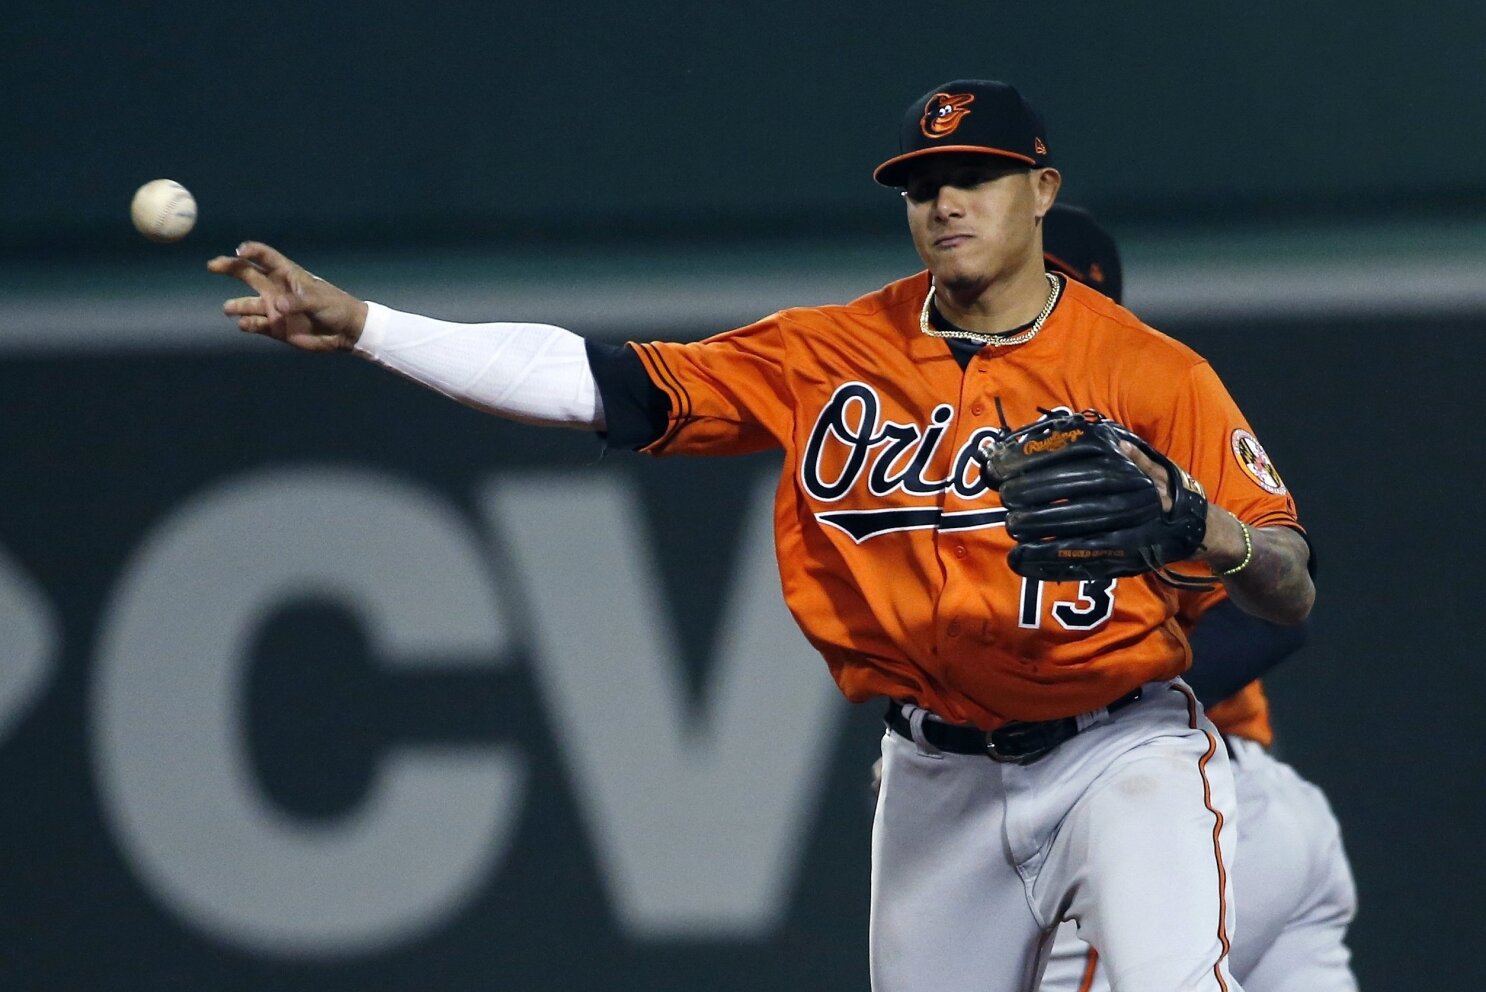 Manny Machado did all the Orioles could have asked, yet his exit will leave  what-ifs - The Washington Post